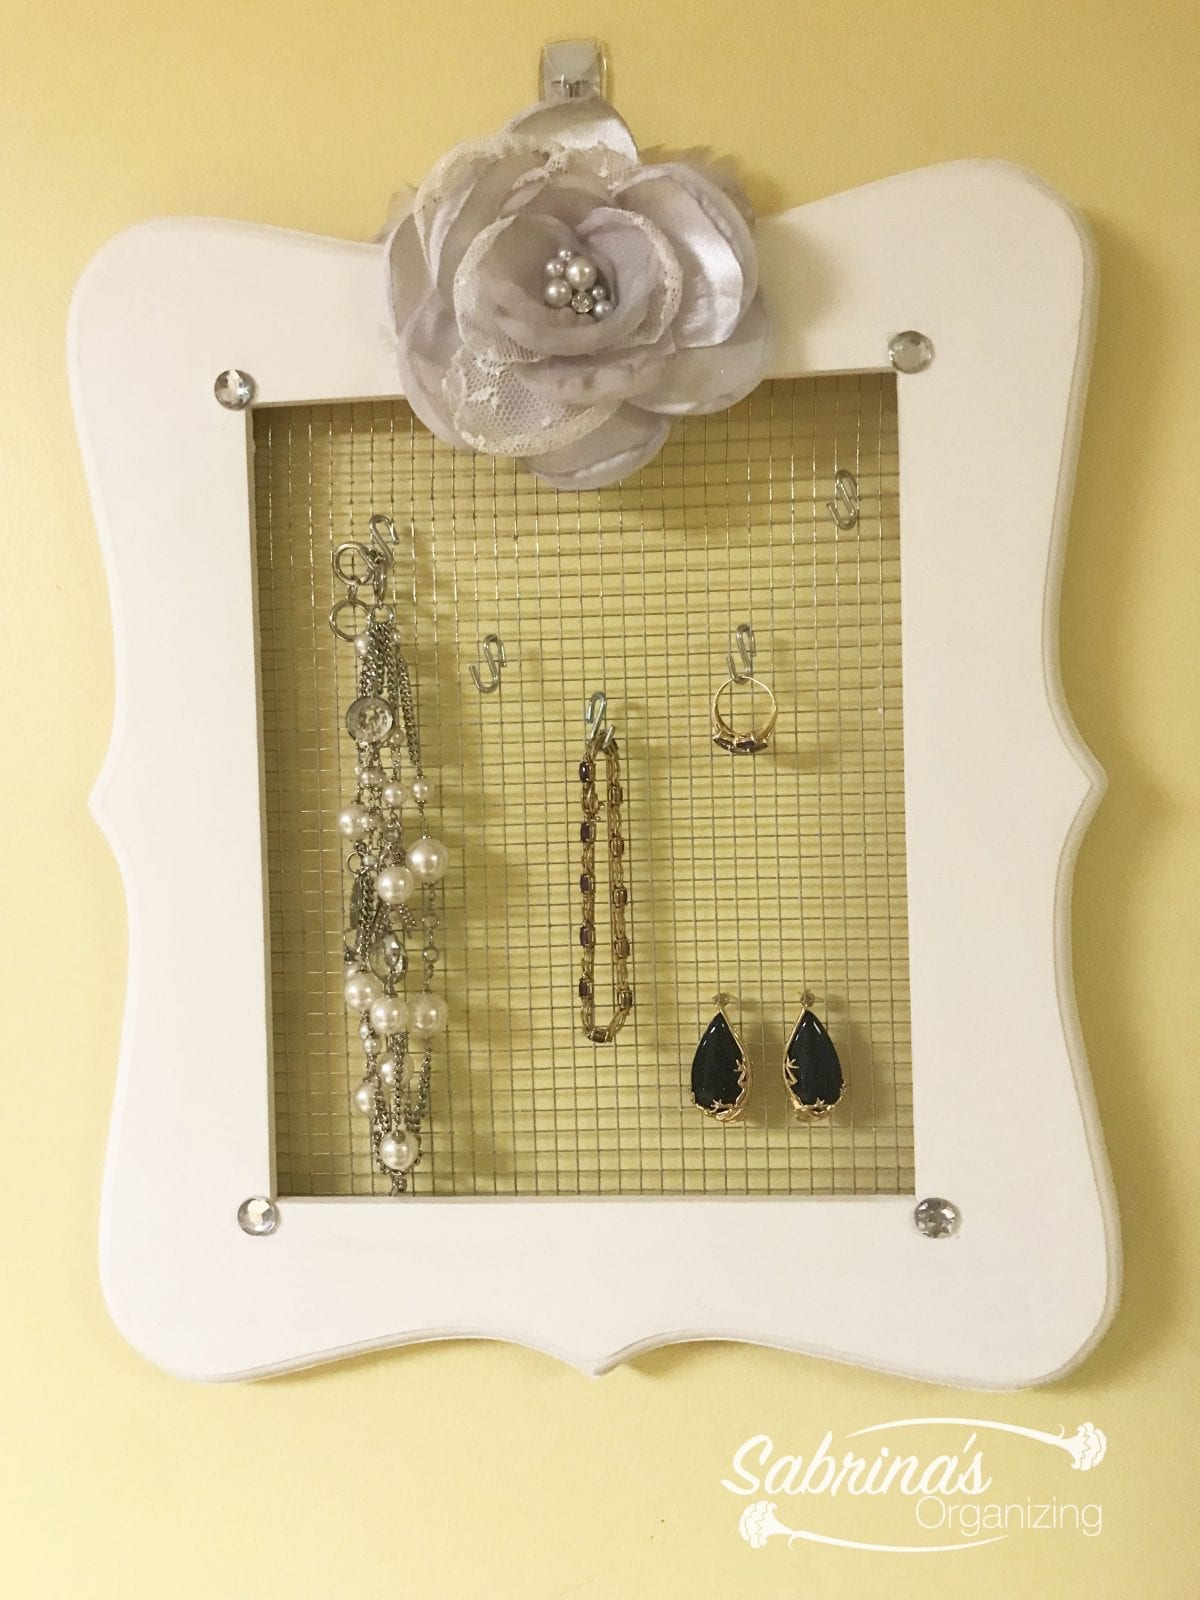 white picture frame with wire mesh hanging jewelry from it to organize and display pretty items